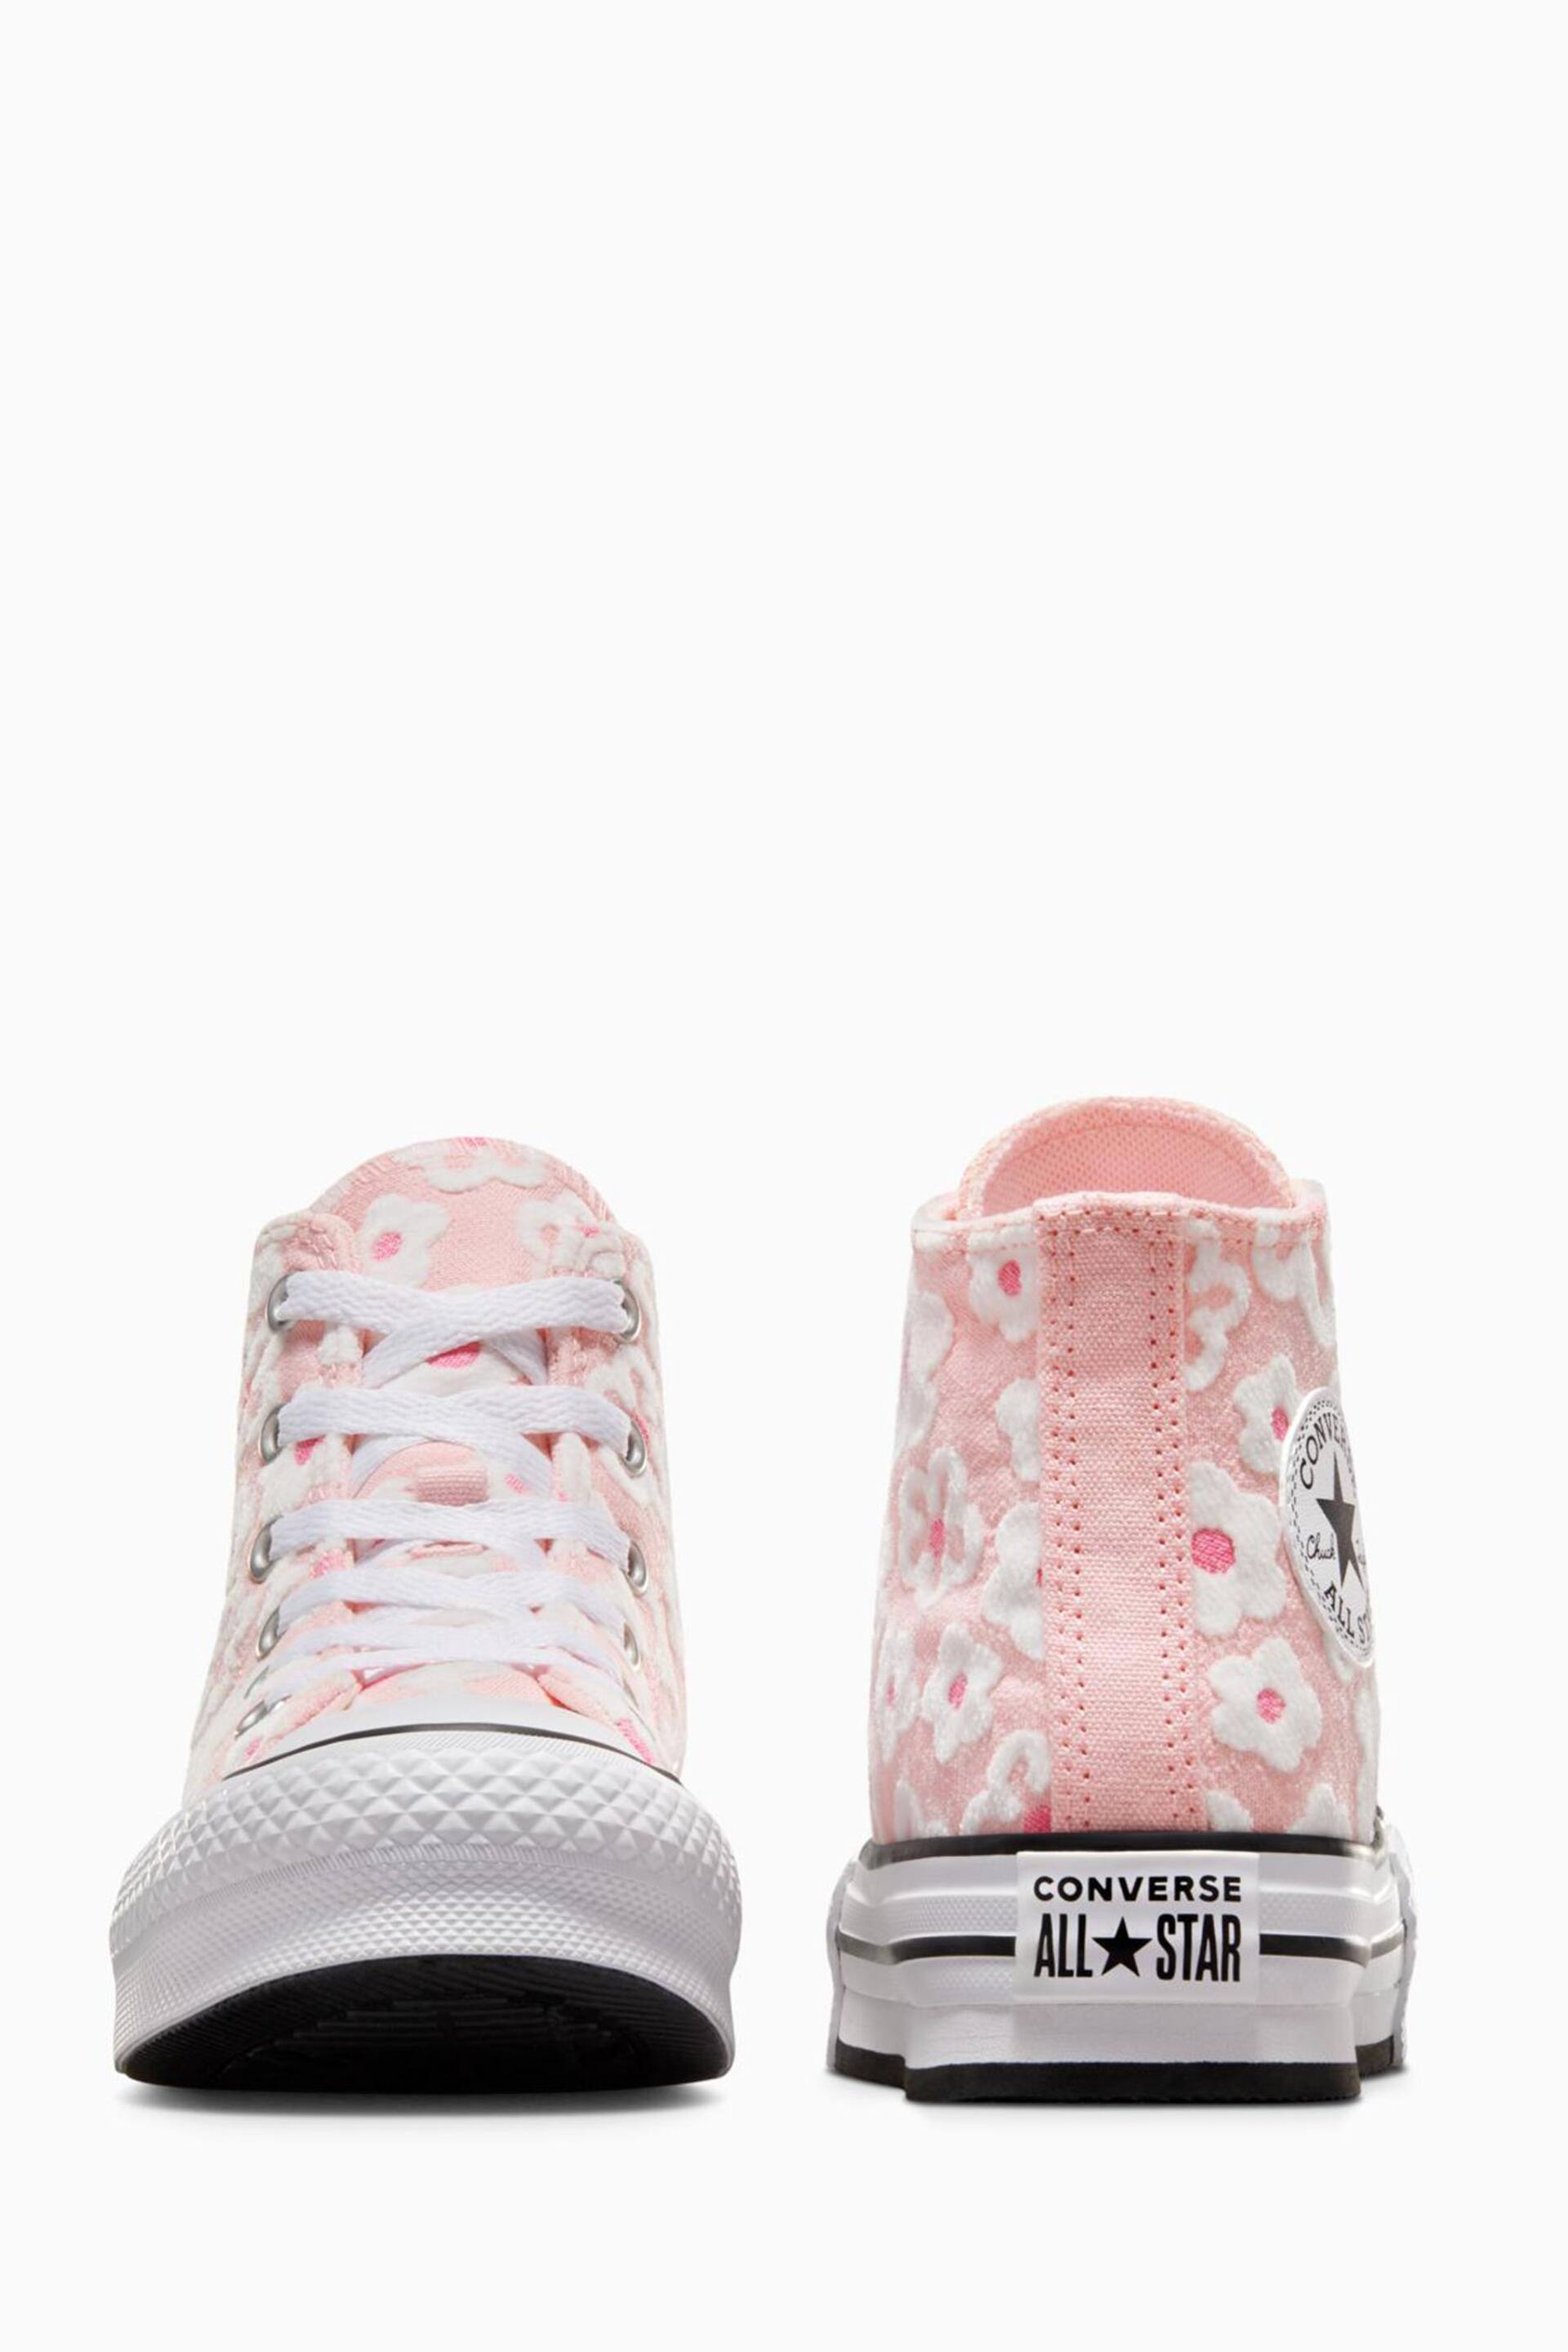 Converse Pink Floral Textured Eva Lift Youth Trainers - Image 9 of 13